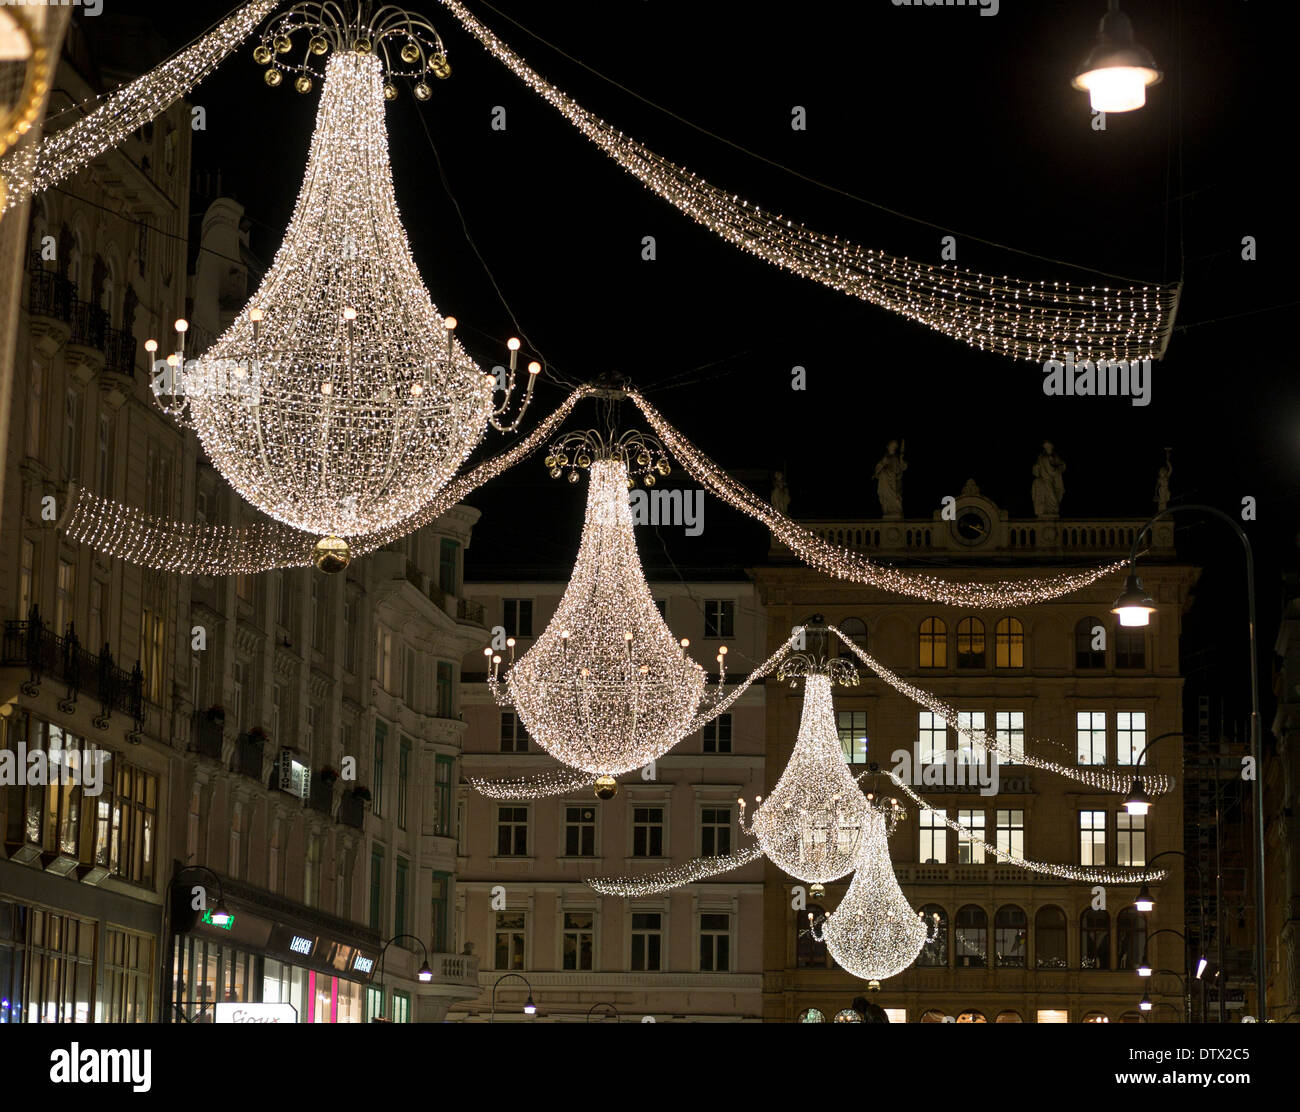 Der Graben Chandeliers. Christmas chandeliers hang high above his famous Vienna shopping street during Advent. Stock Photo